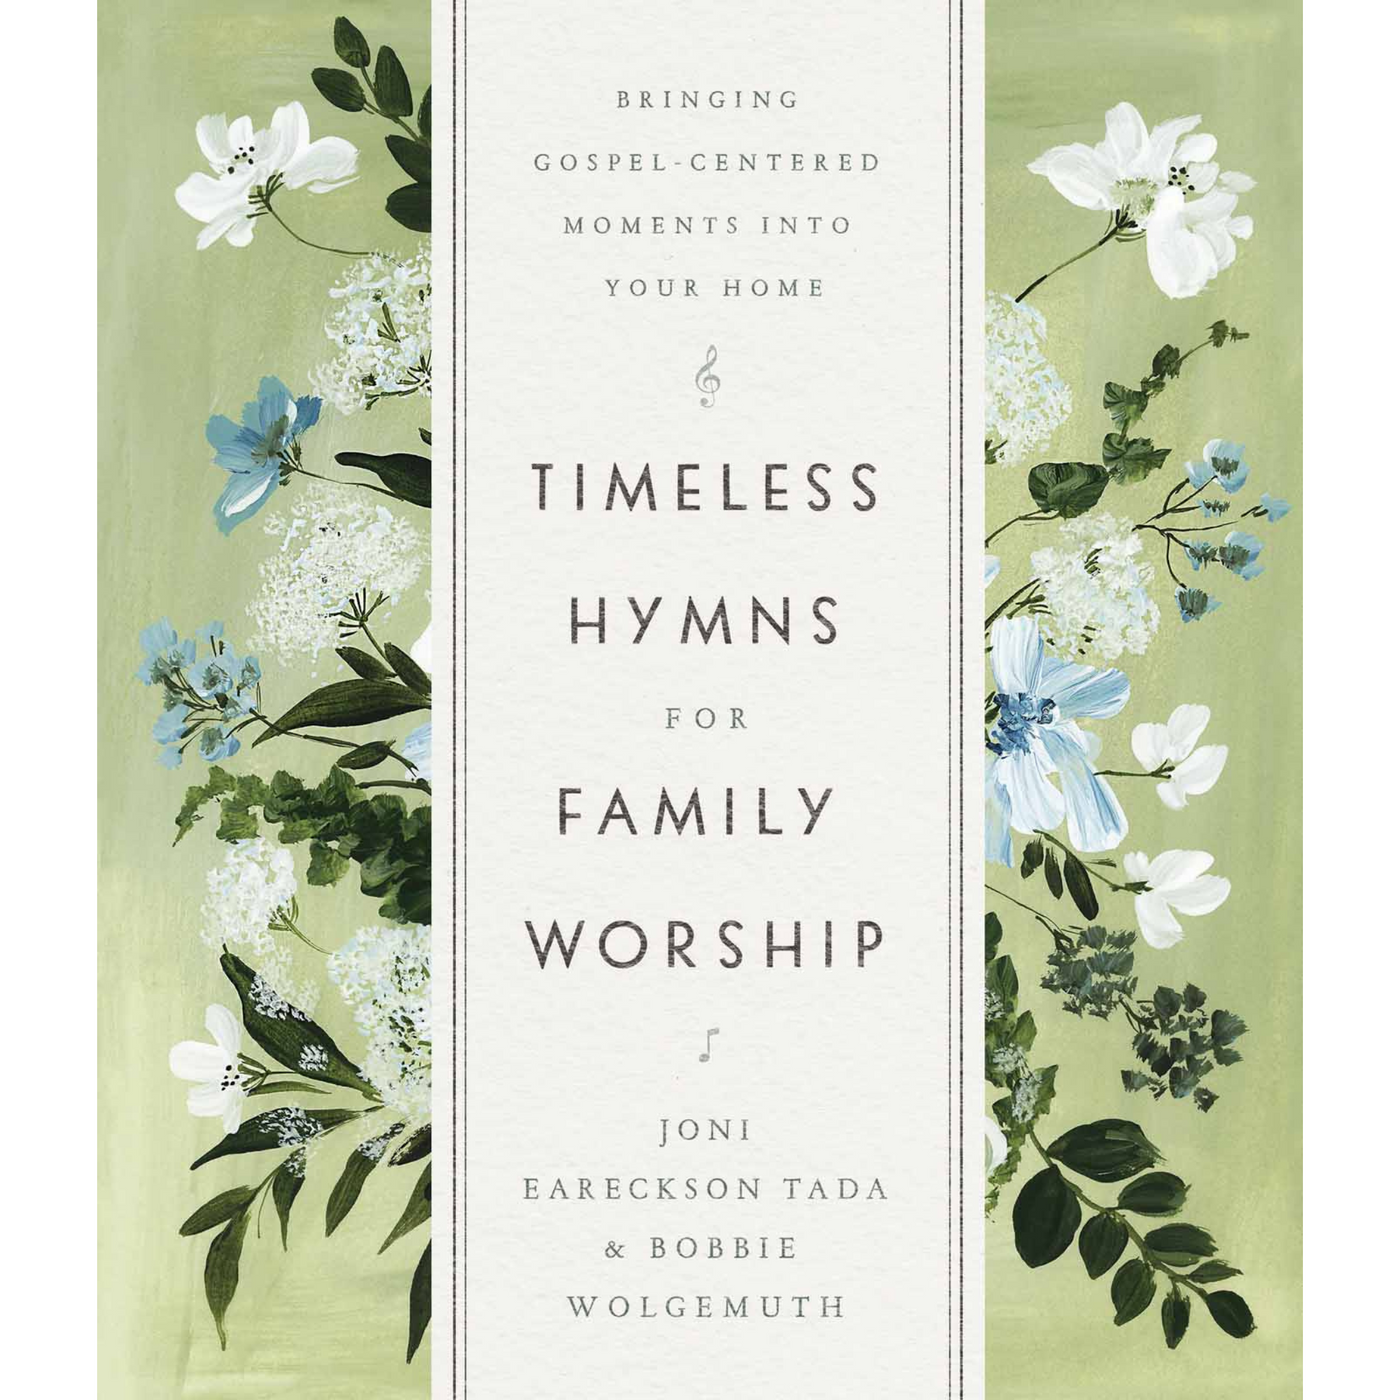 Timeless Hymns For Family Worship